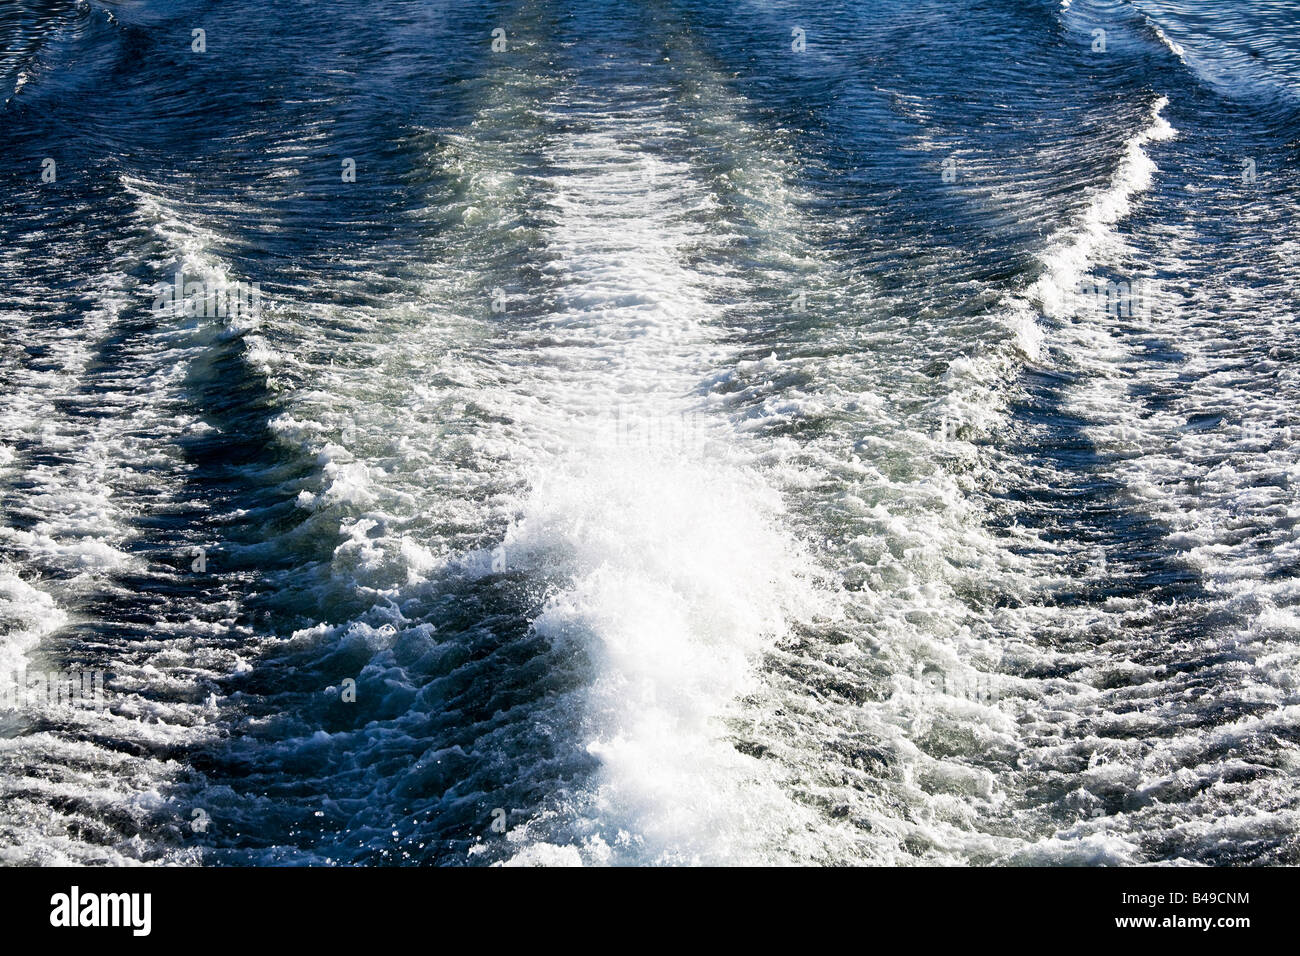 Wake from a boat Stock Photo